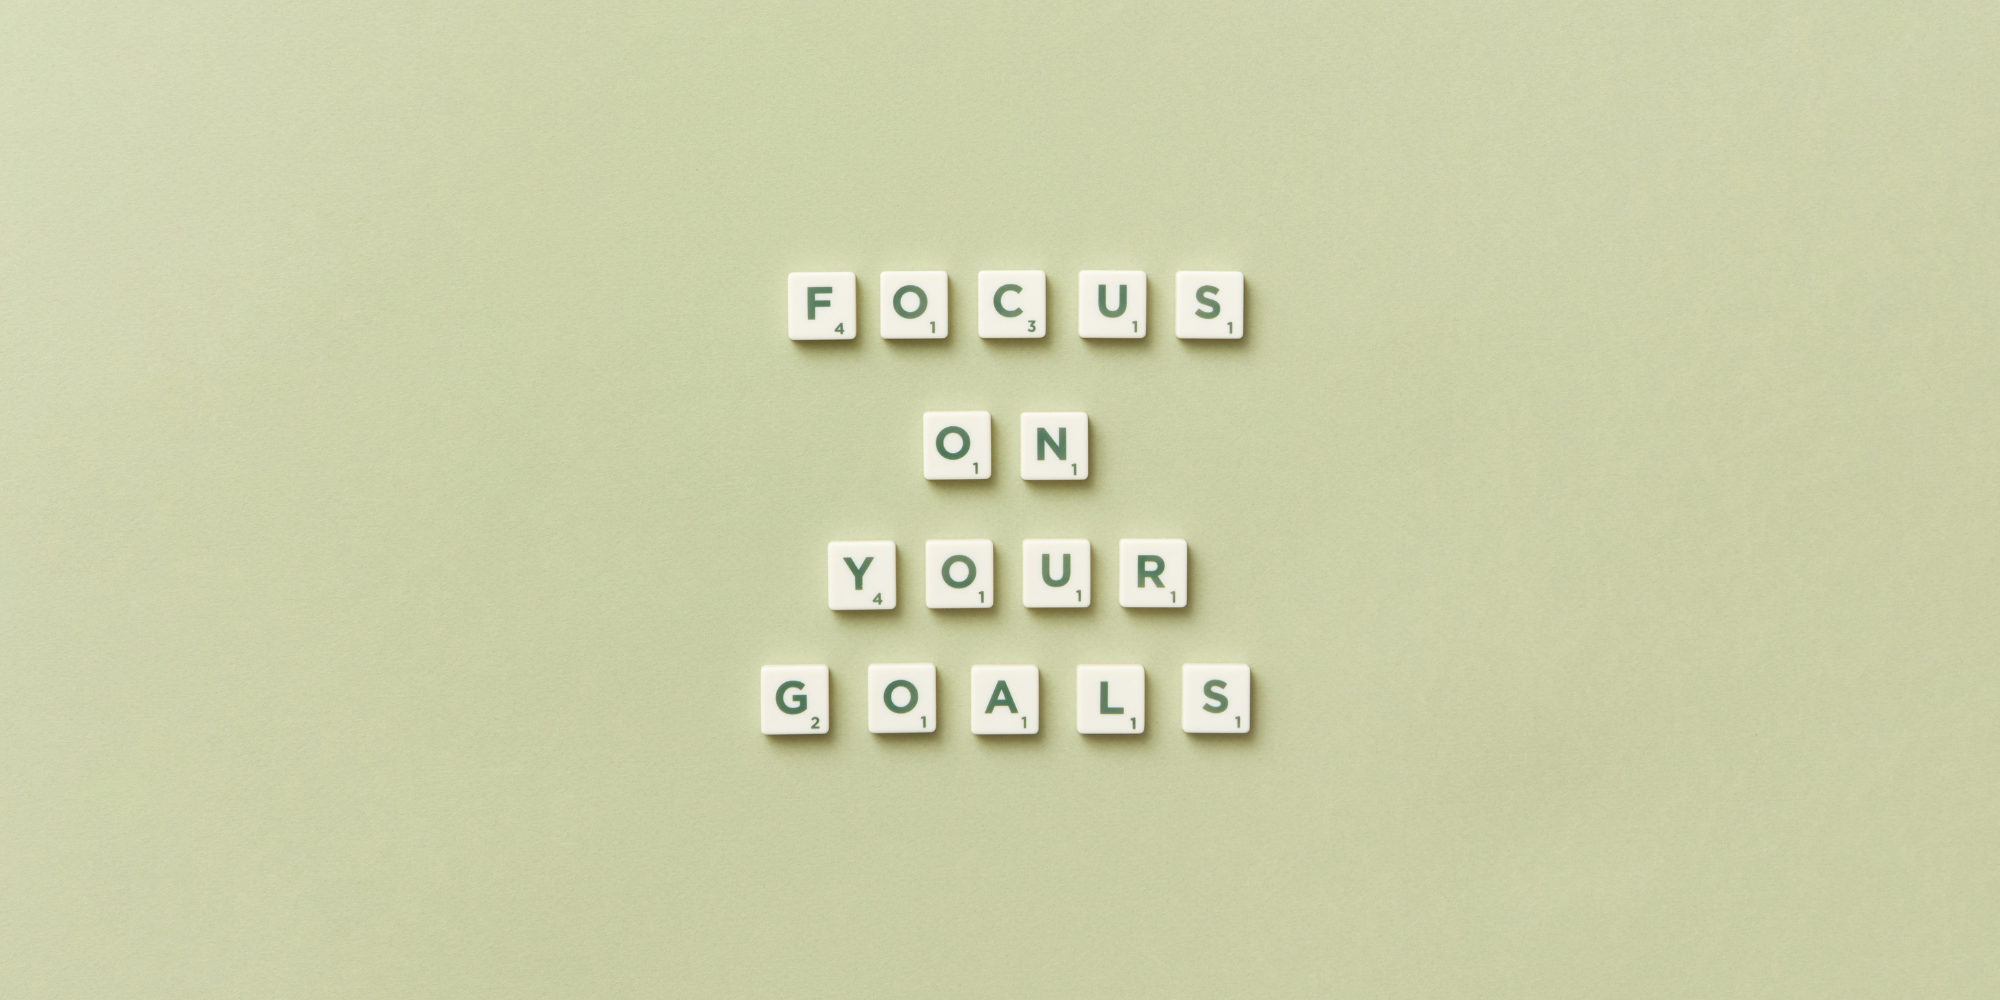 Against a pale green background are square letters arranged to read "Focus/on/your/goals"